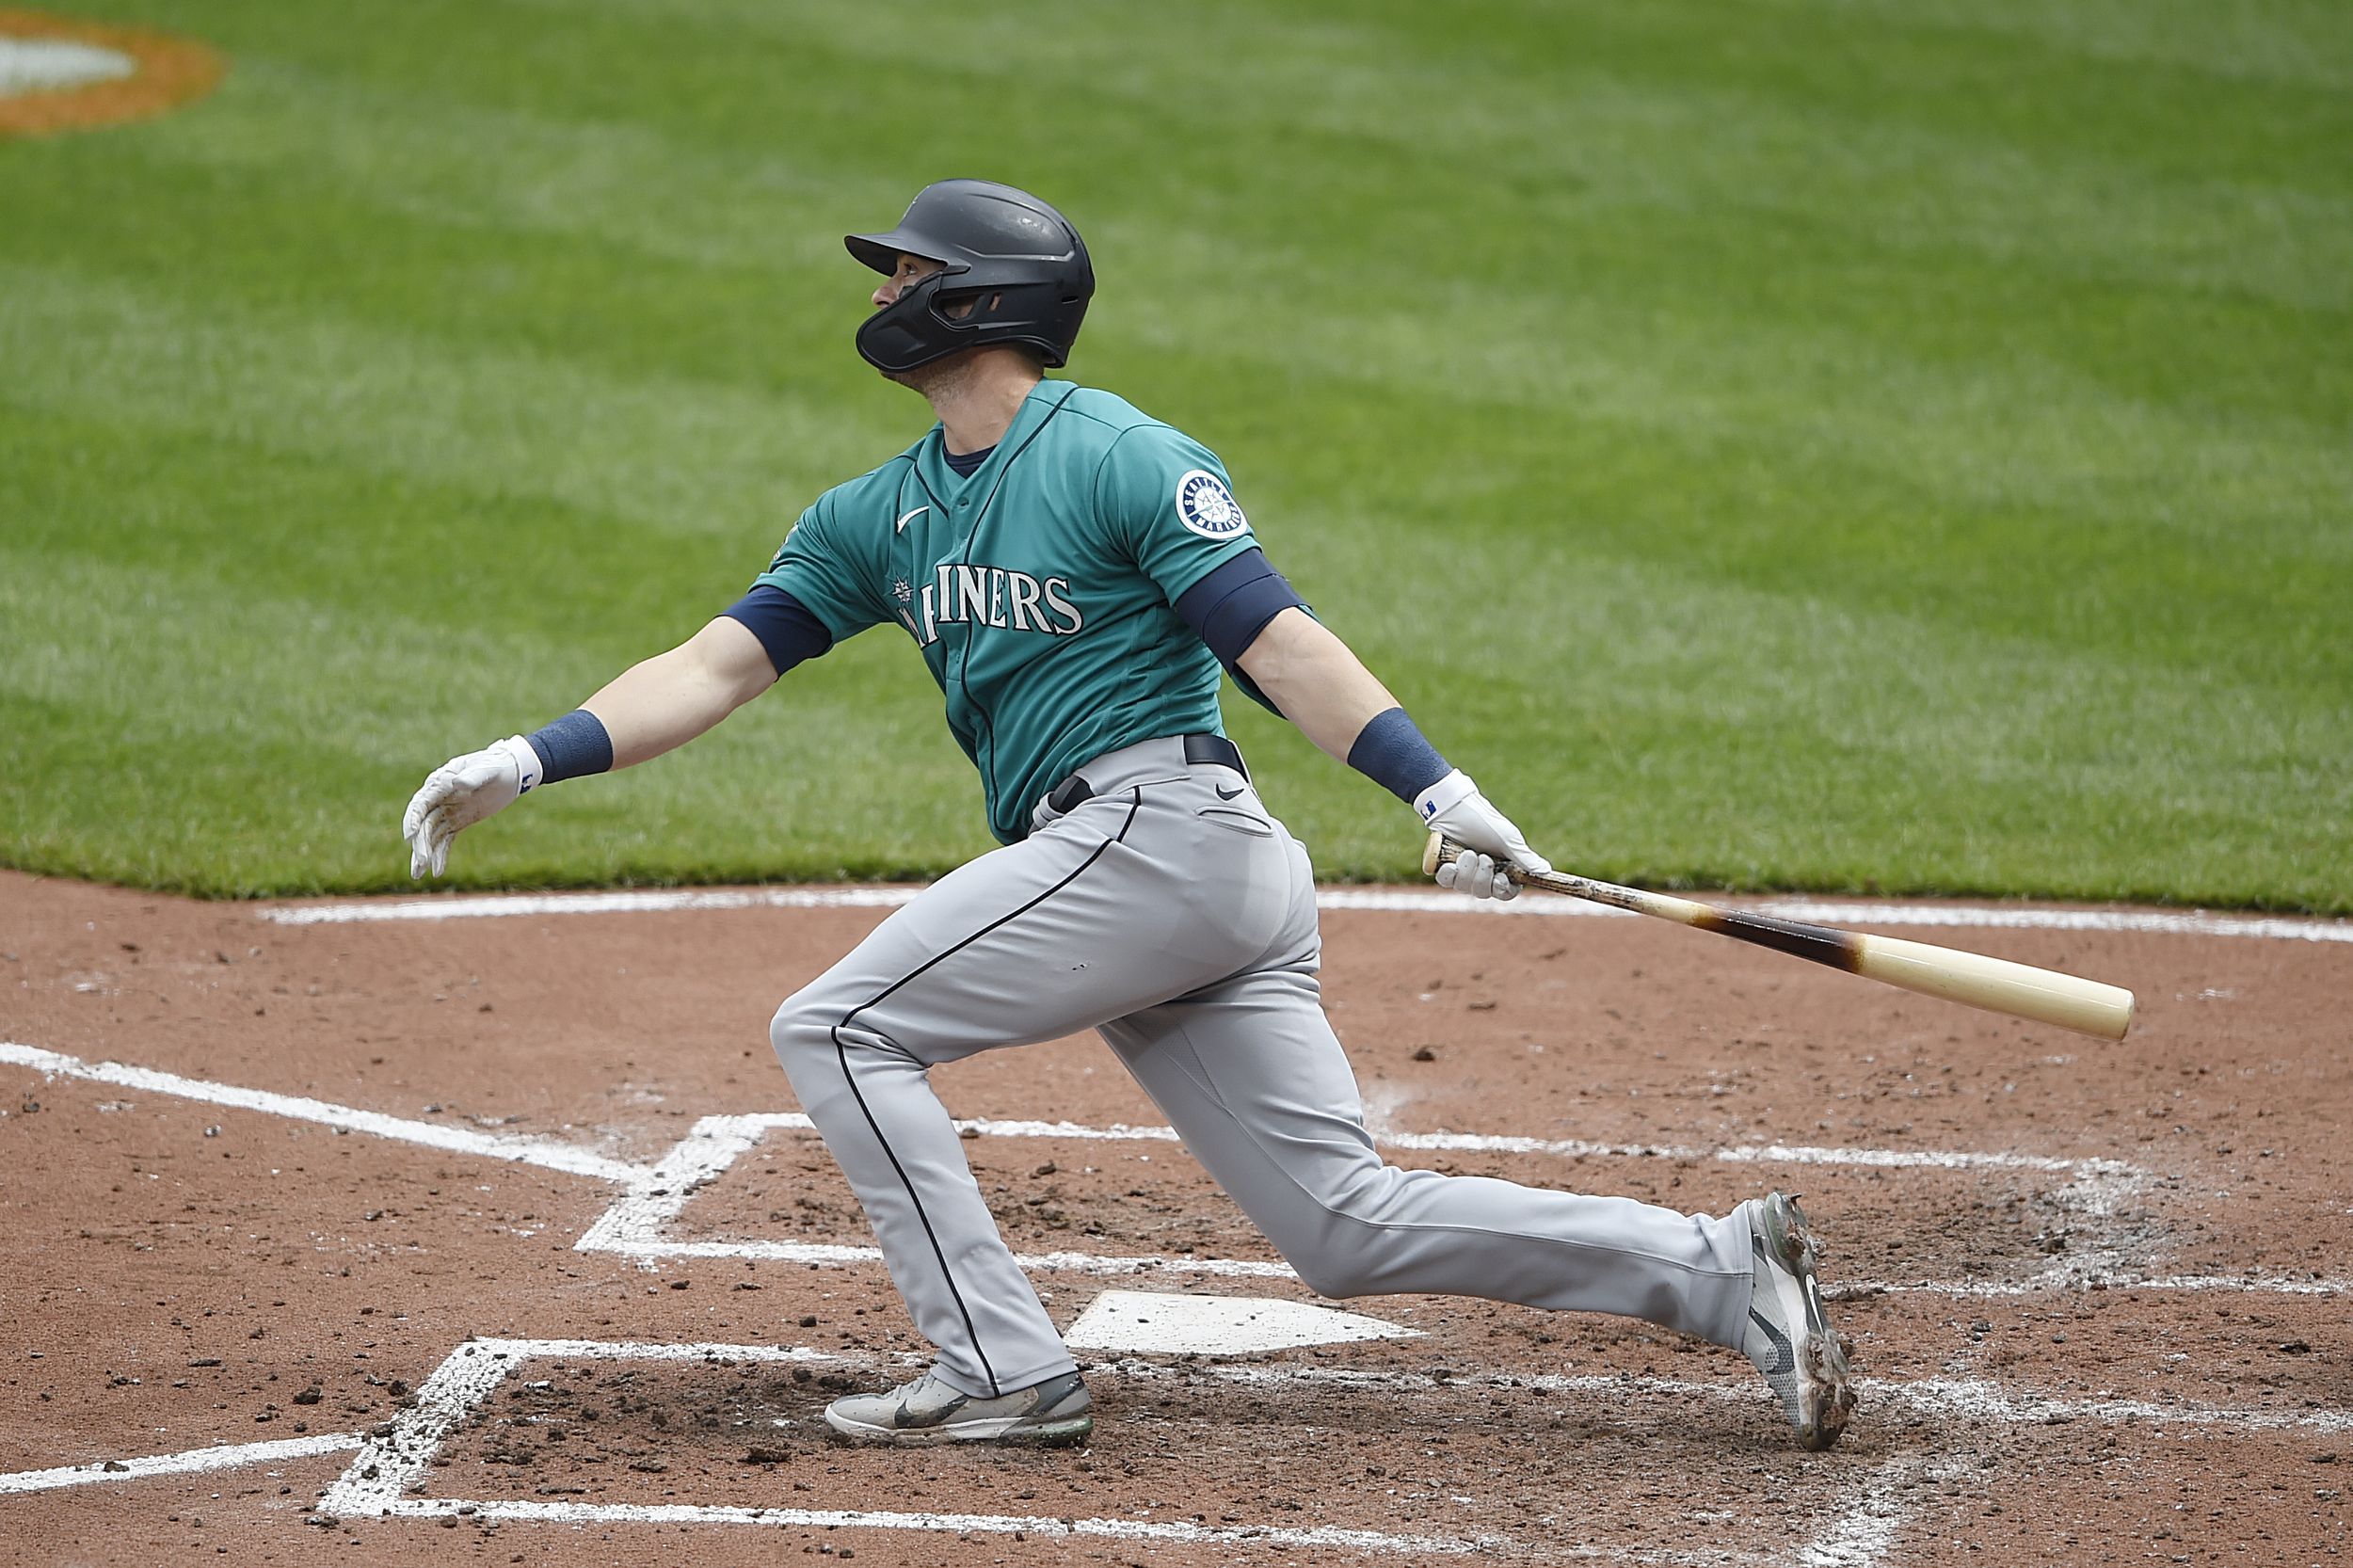 MLB Free Agency: Could Mitch Haniger Work for Miami? - Fish Stripes